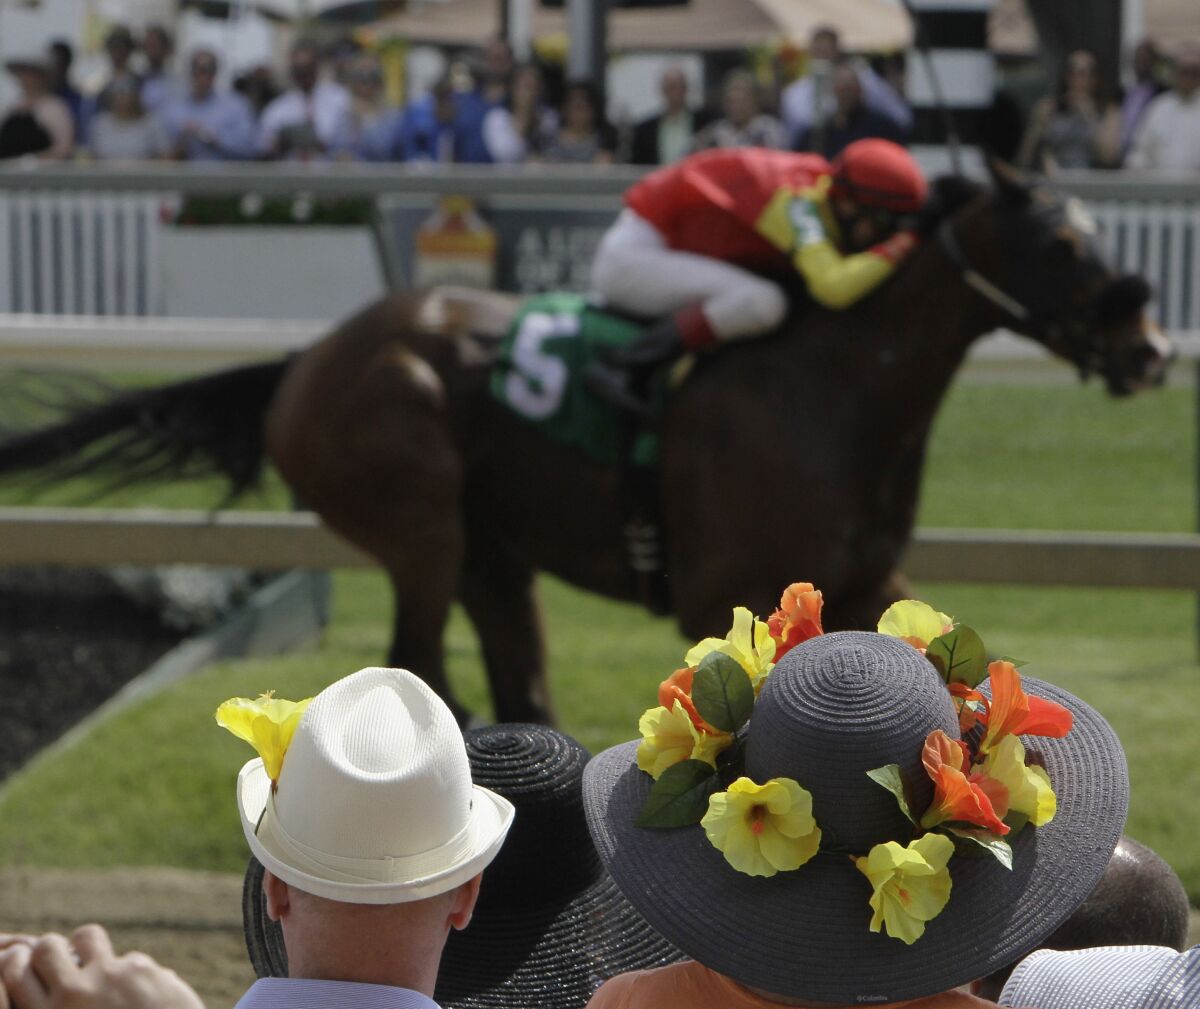 Trevor McCarthy guides Fish Whistler to victory in the Deputed Testimony Handicap horse at Pimlico Race Course in 2015.